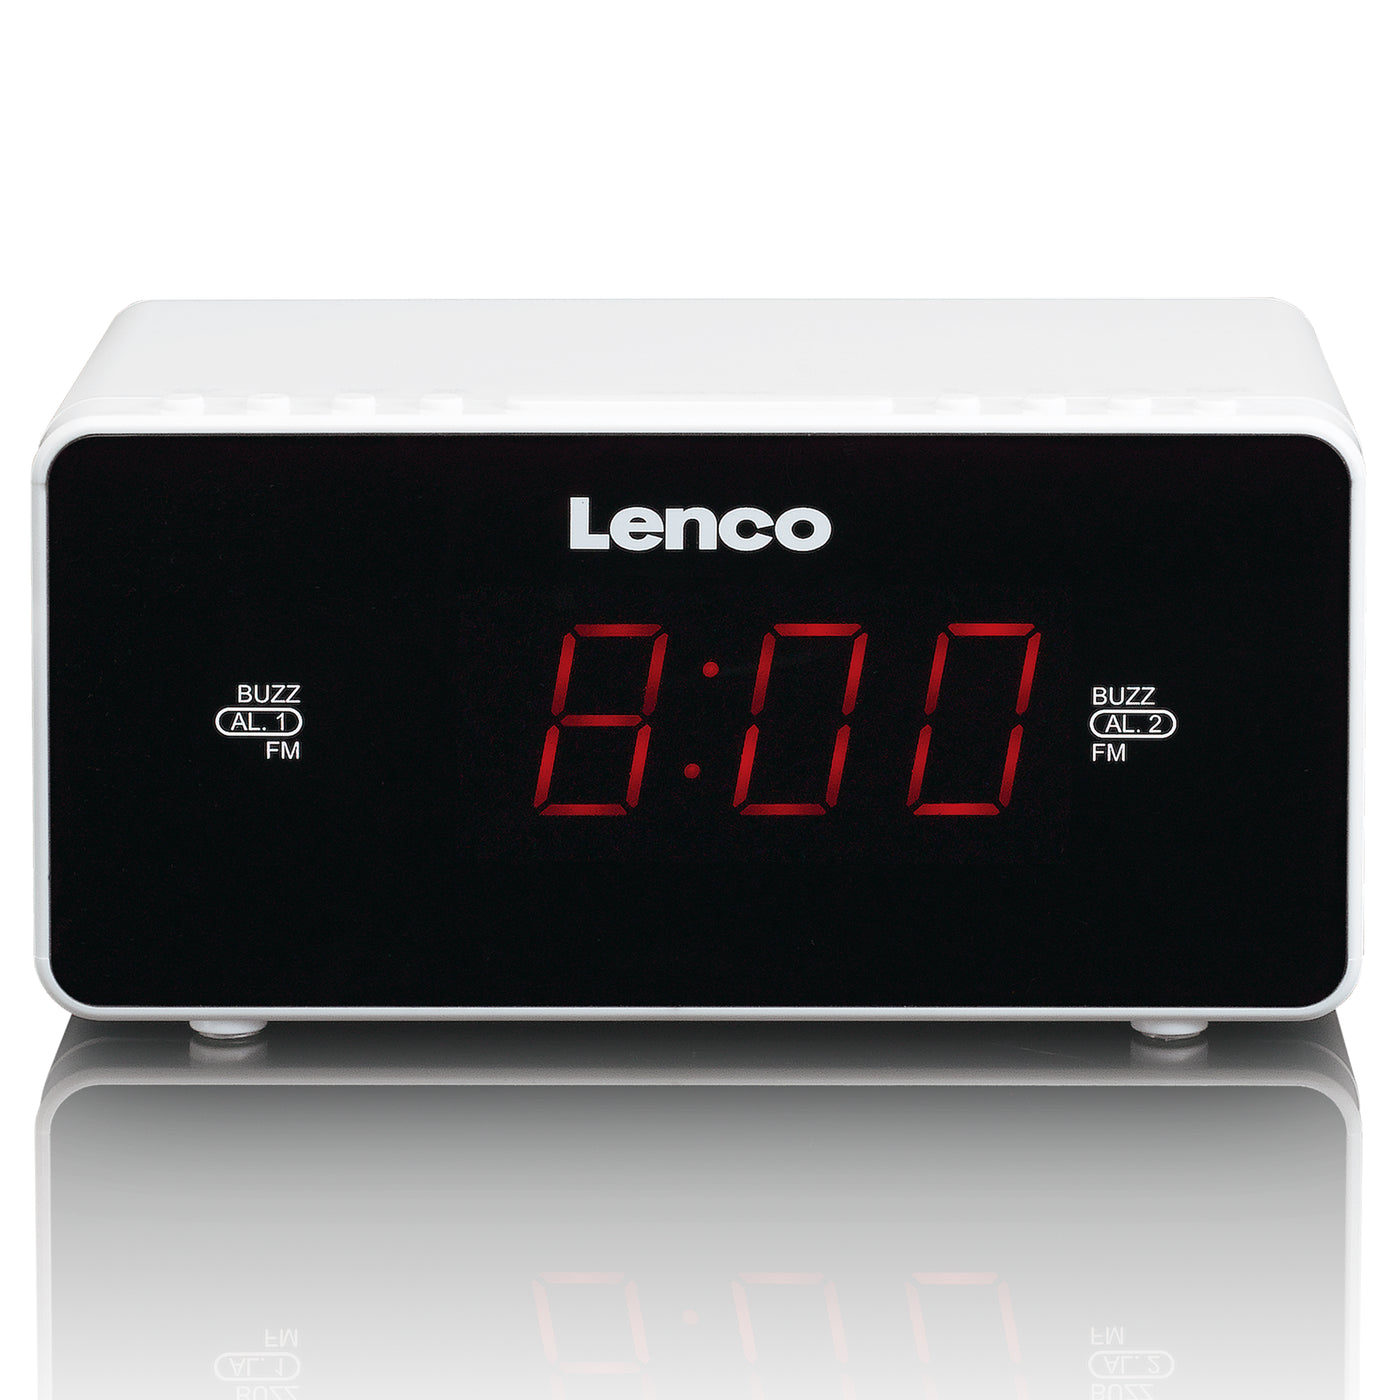 LENCO CR-510WH - Stereo FM clock radio with 0,9" LED display - White